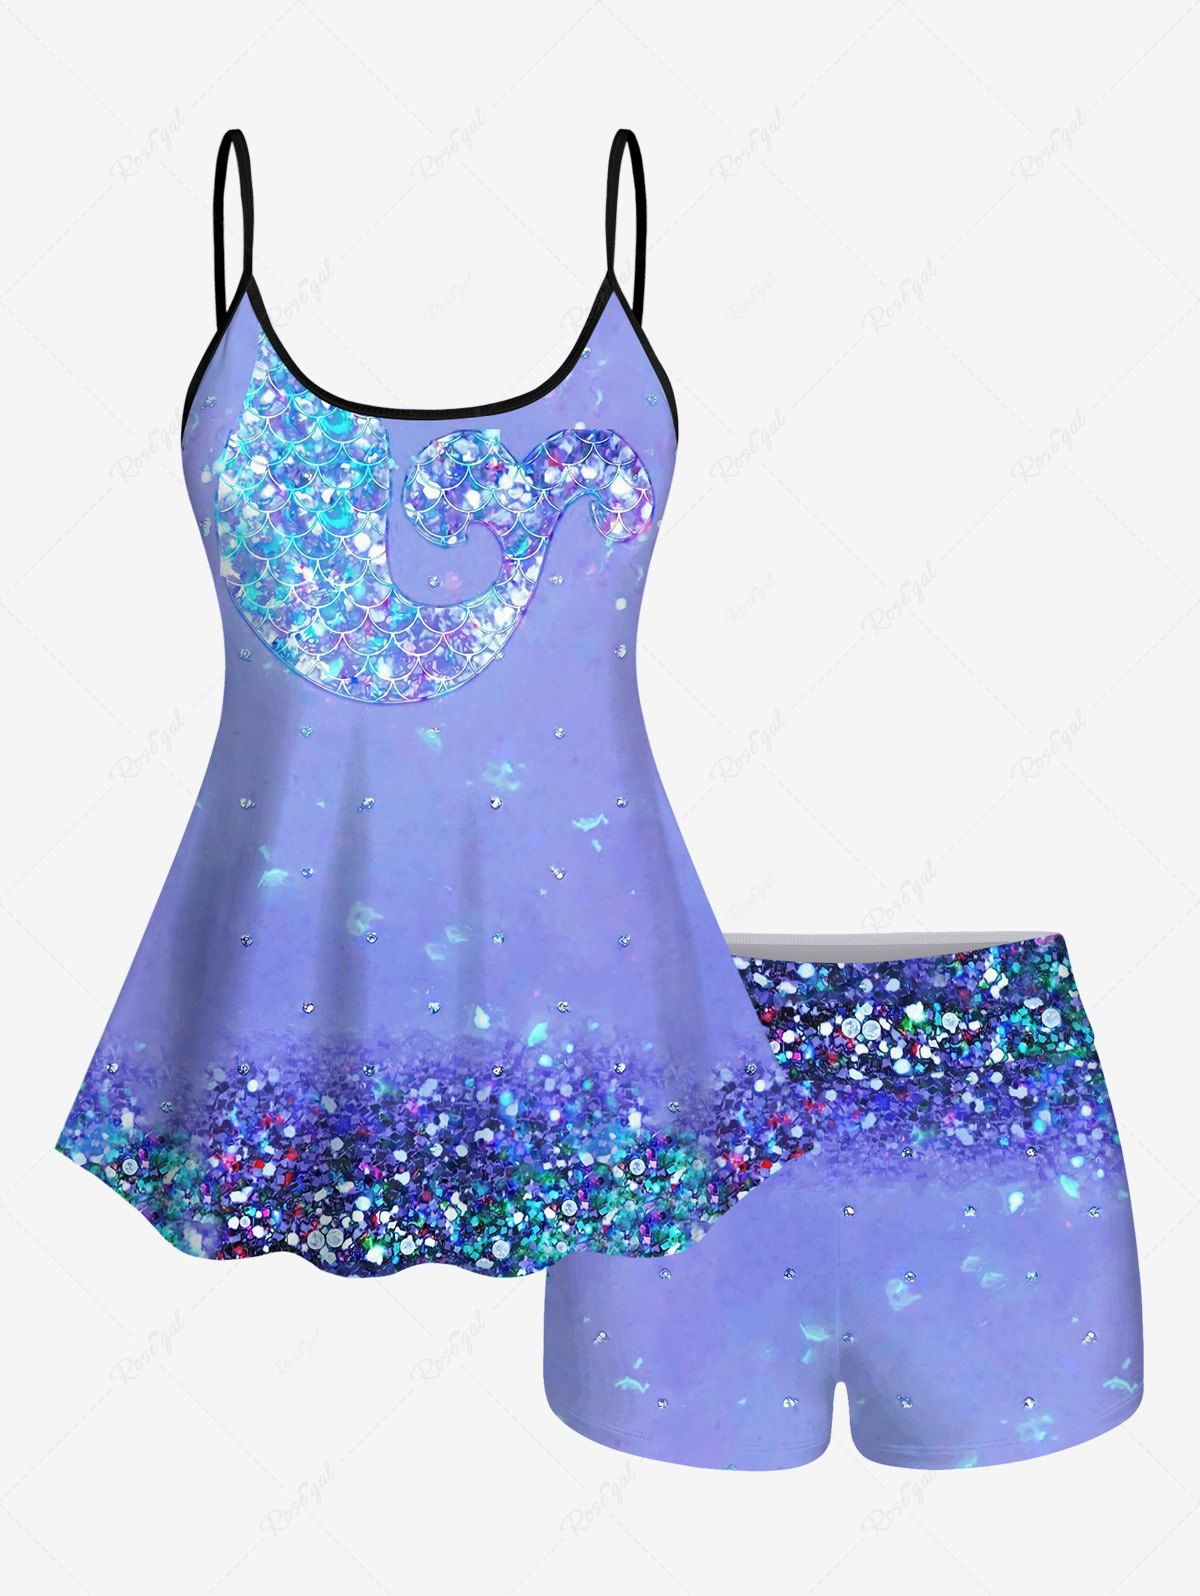 Store Glitter Sparkling Sequins Fish Scale Mermaid Ombre Water Droplet Print Backless Boyleg Tankini Swimsuit (Adjustable Shoulder Strap)  